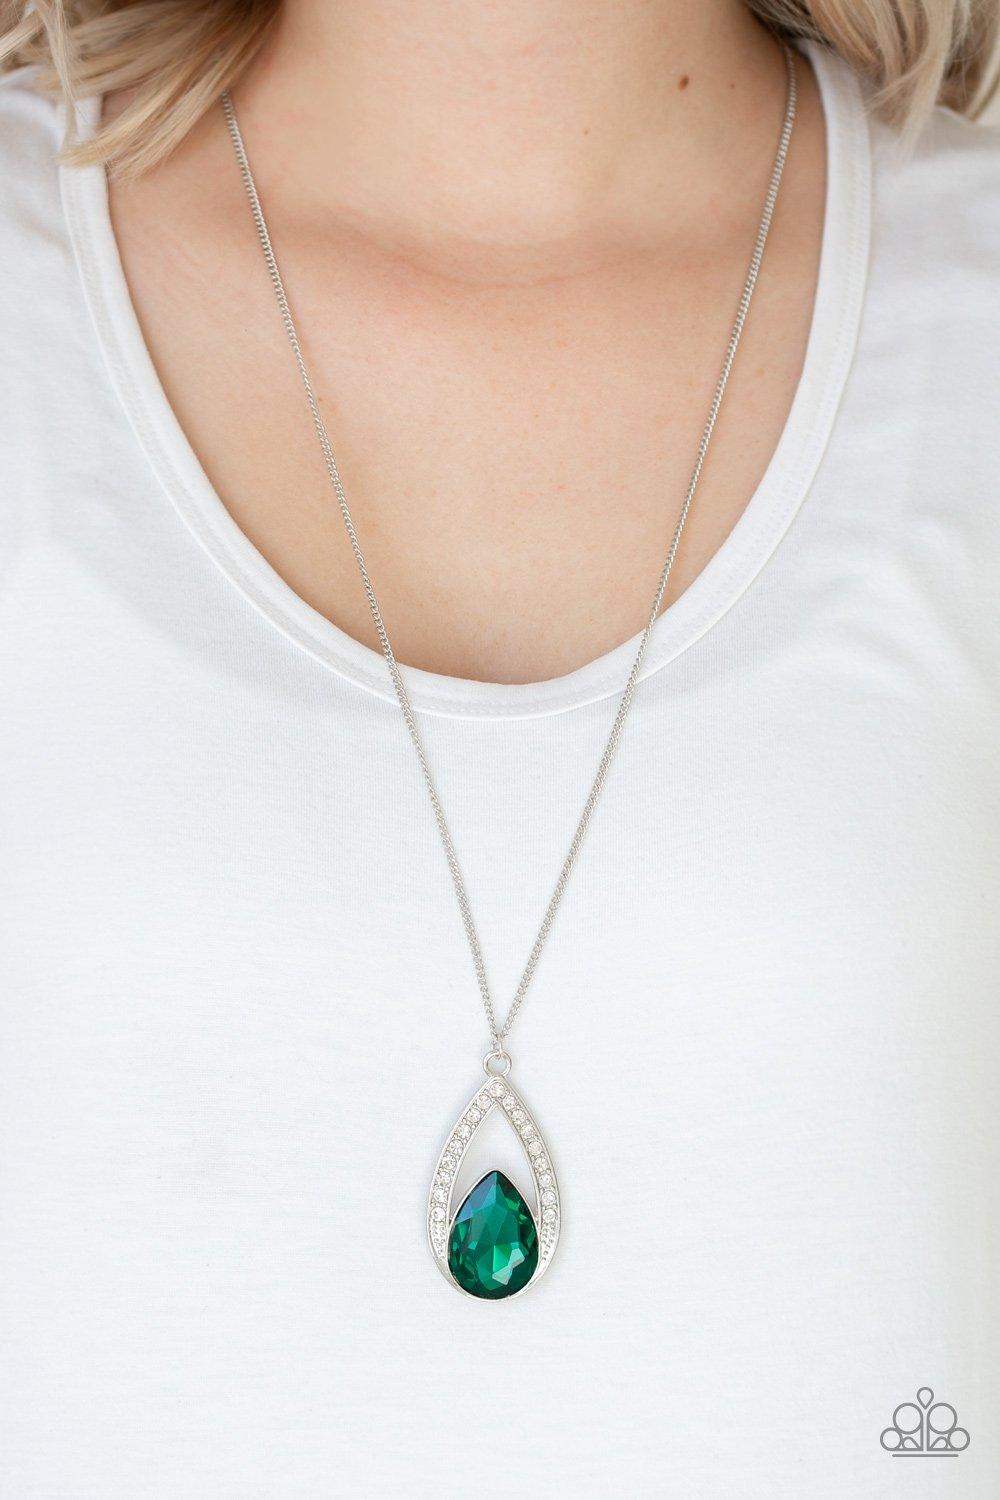 Notorious Noble Green Necklace - Jewelry by Bretta